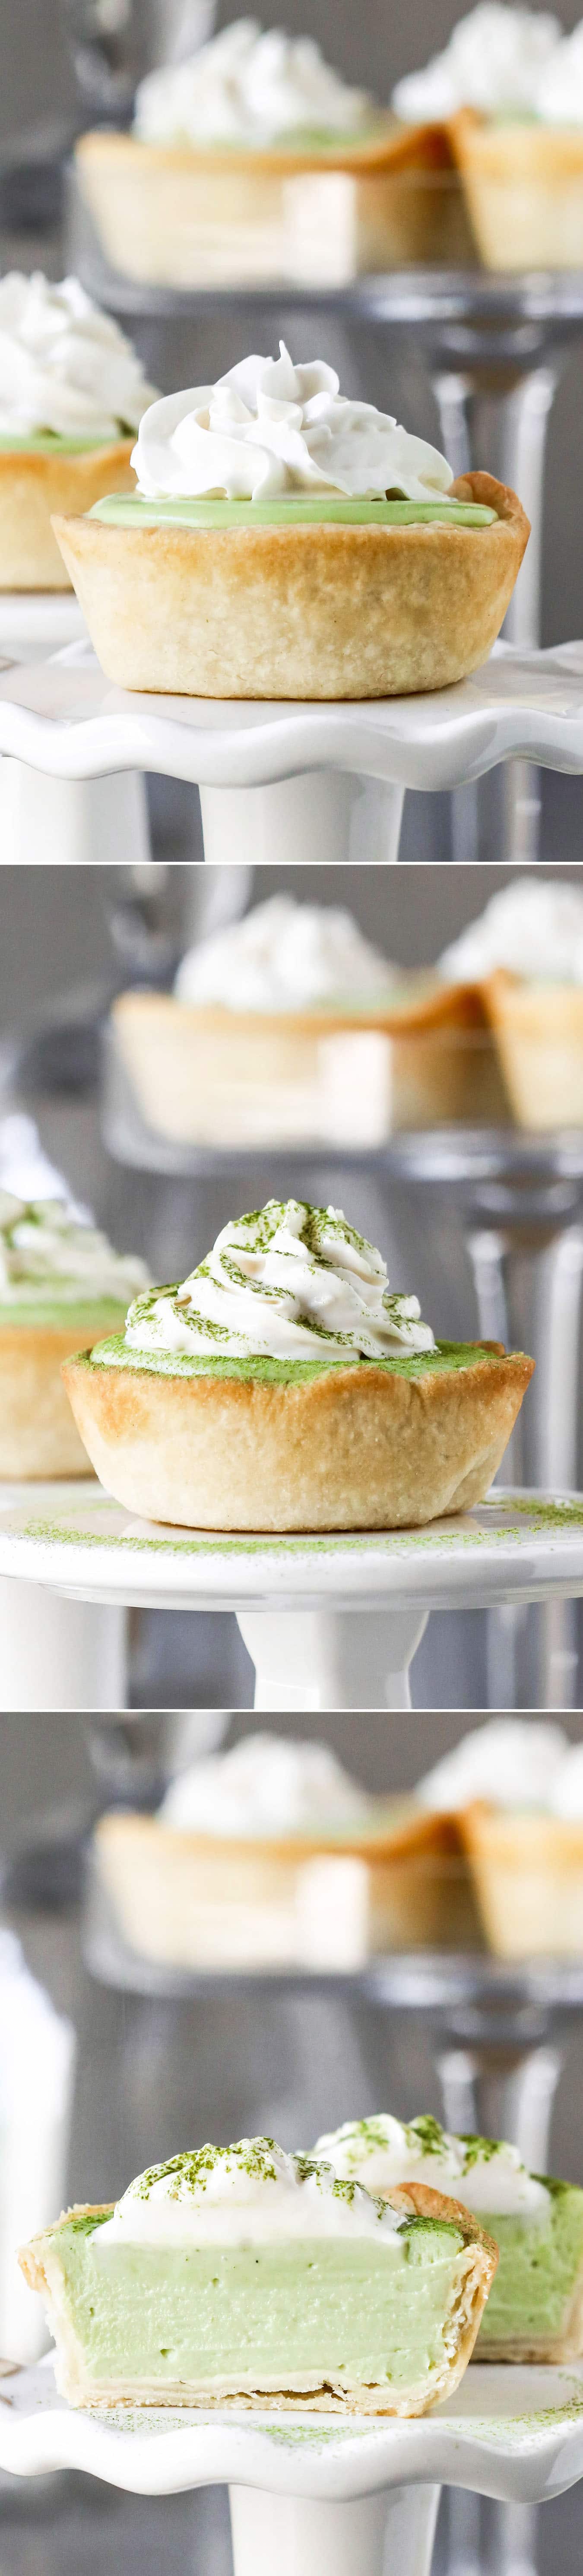 These Mini Matcha Green Tea White Chocolate Pies have a light and flaky pie crust filled with a creamy, sweet, delicious matcha-white chocolate filling.